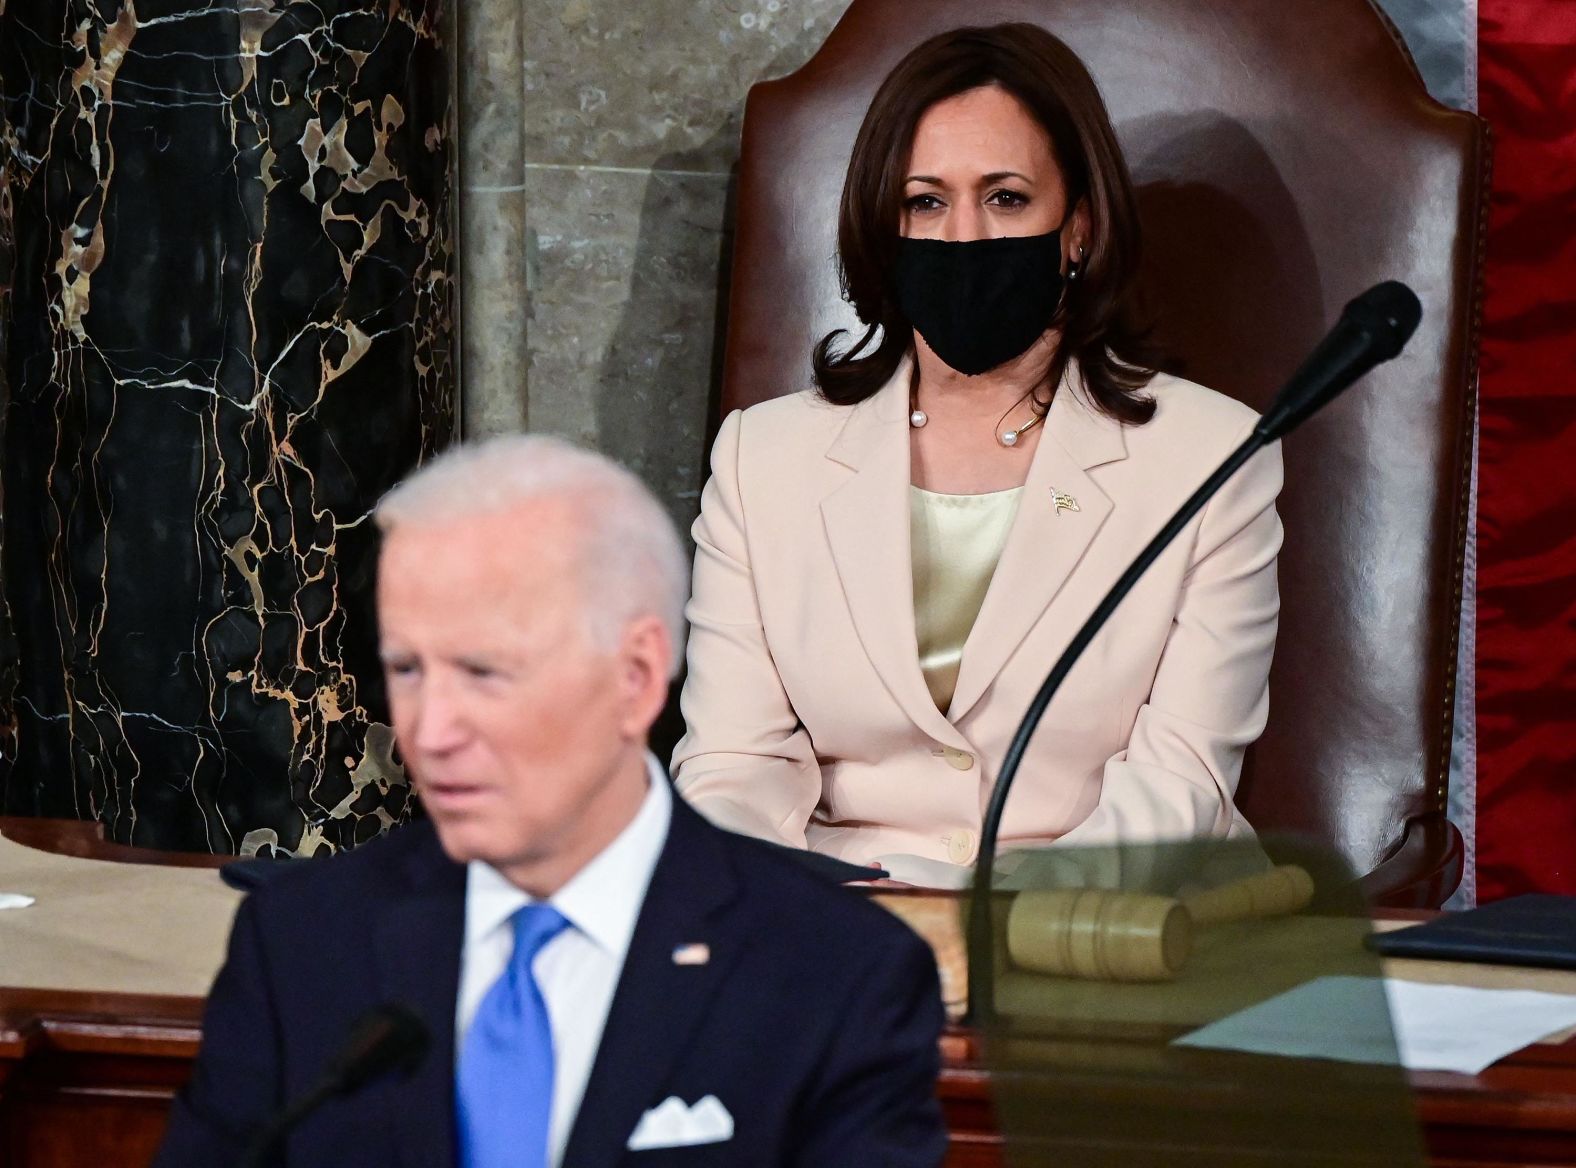 Harris watches Biden speak from the same spot where he once sat. Biden was vice president for eight years.